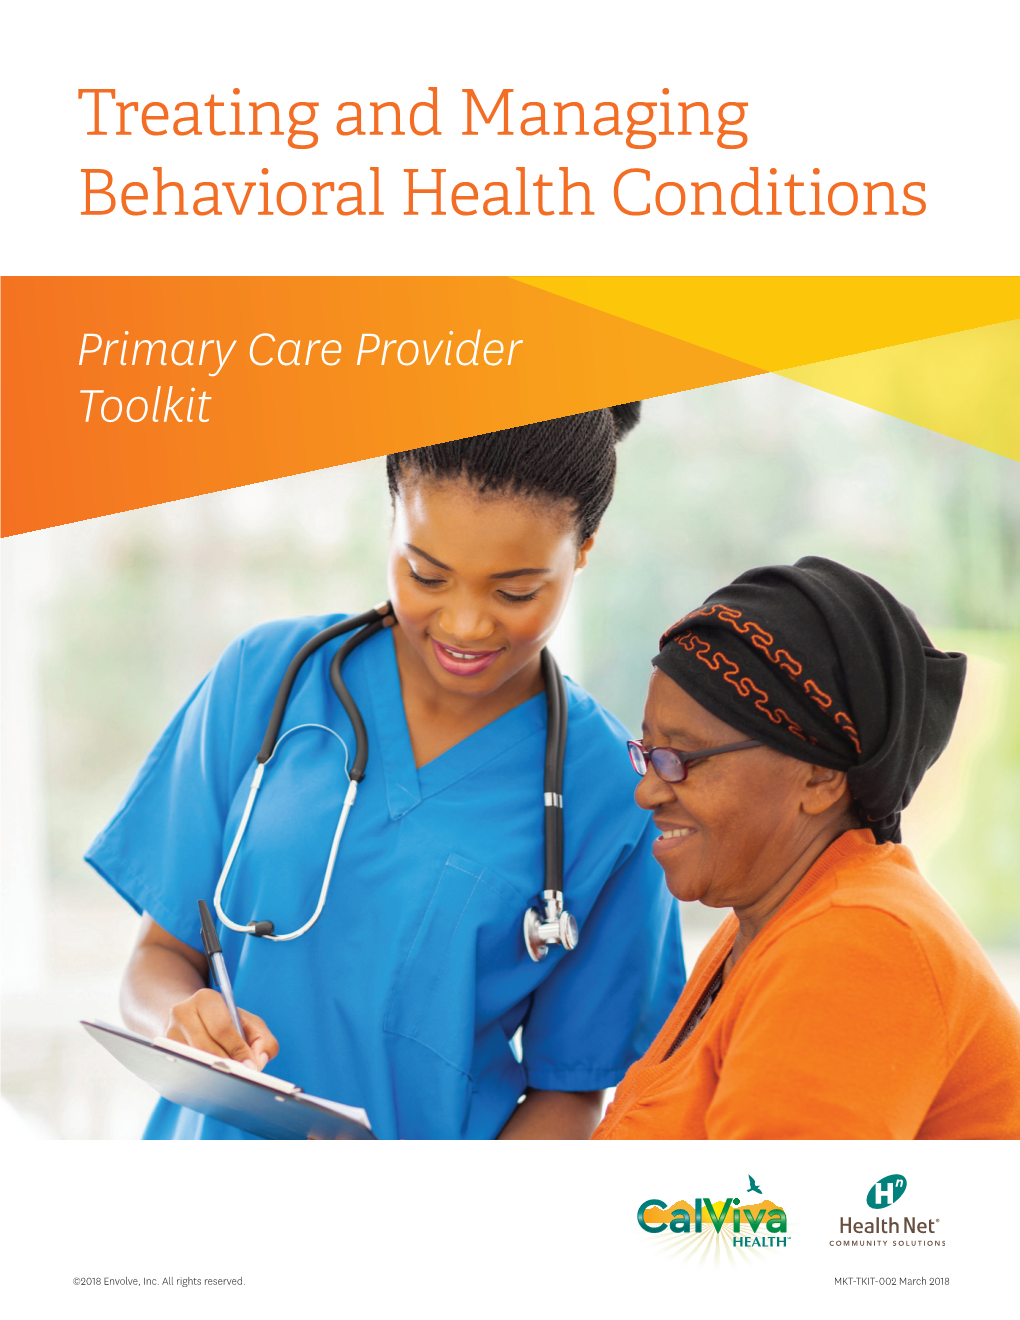 Treating and Managing Behavioral Health Conditions Toolkit